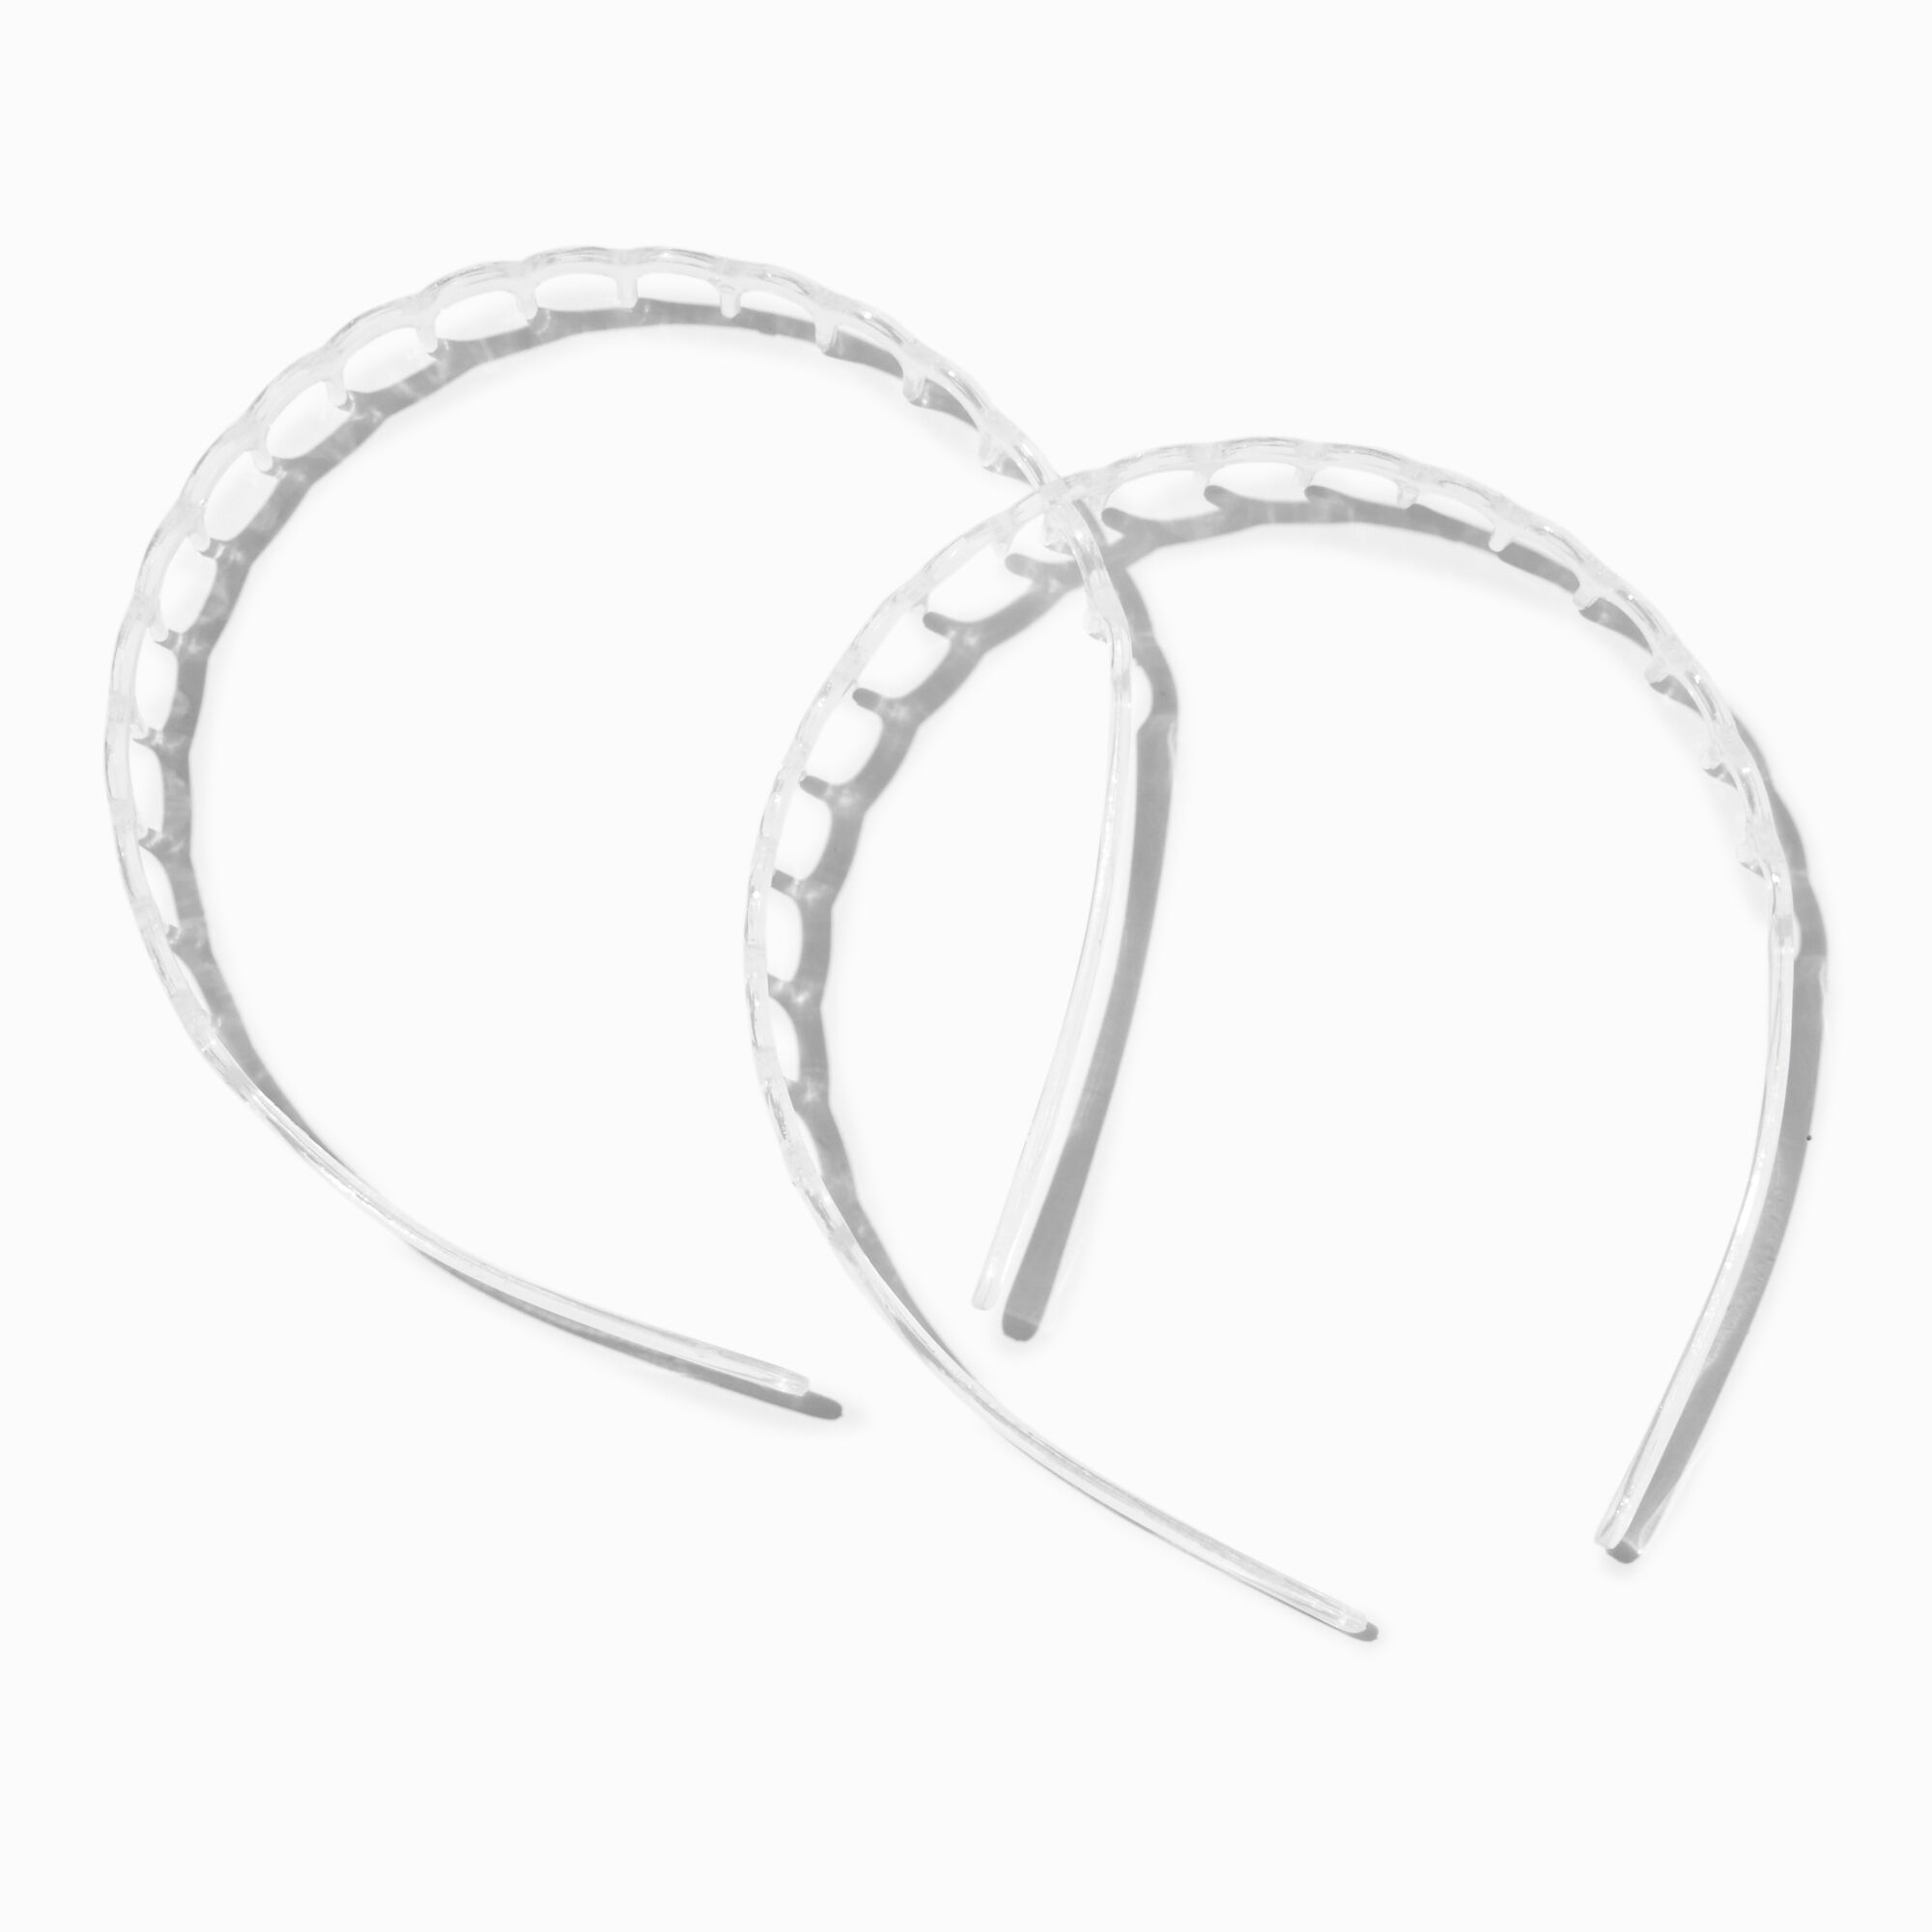 View Claires Clear Scalloped Headbands 2 Pack information